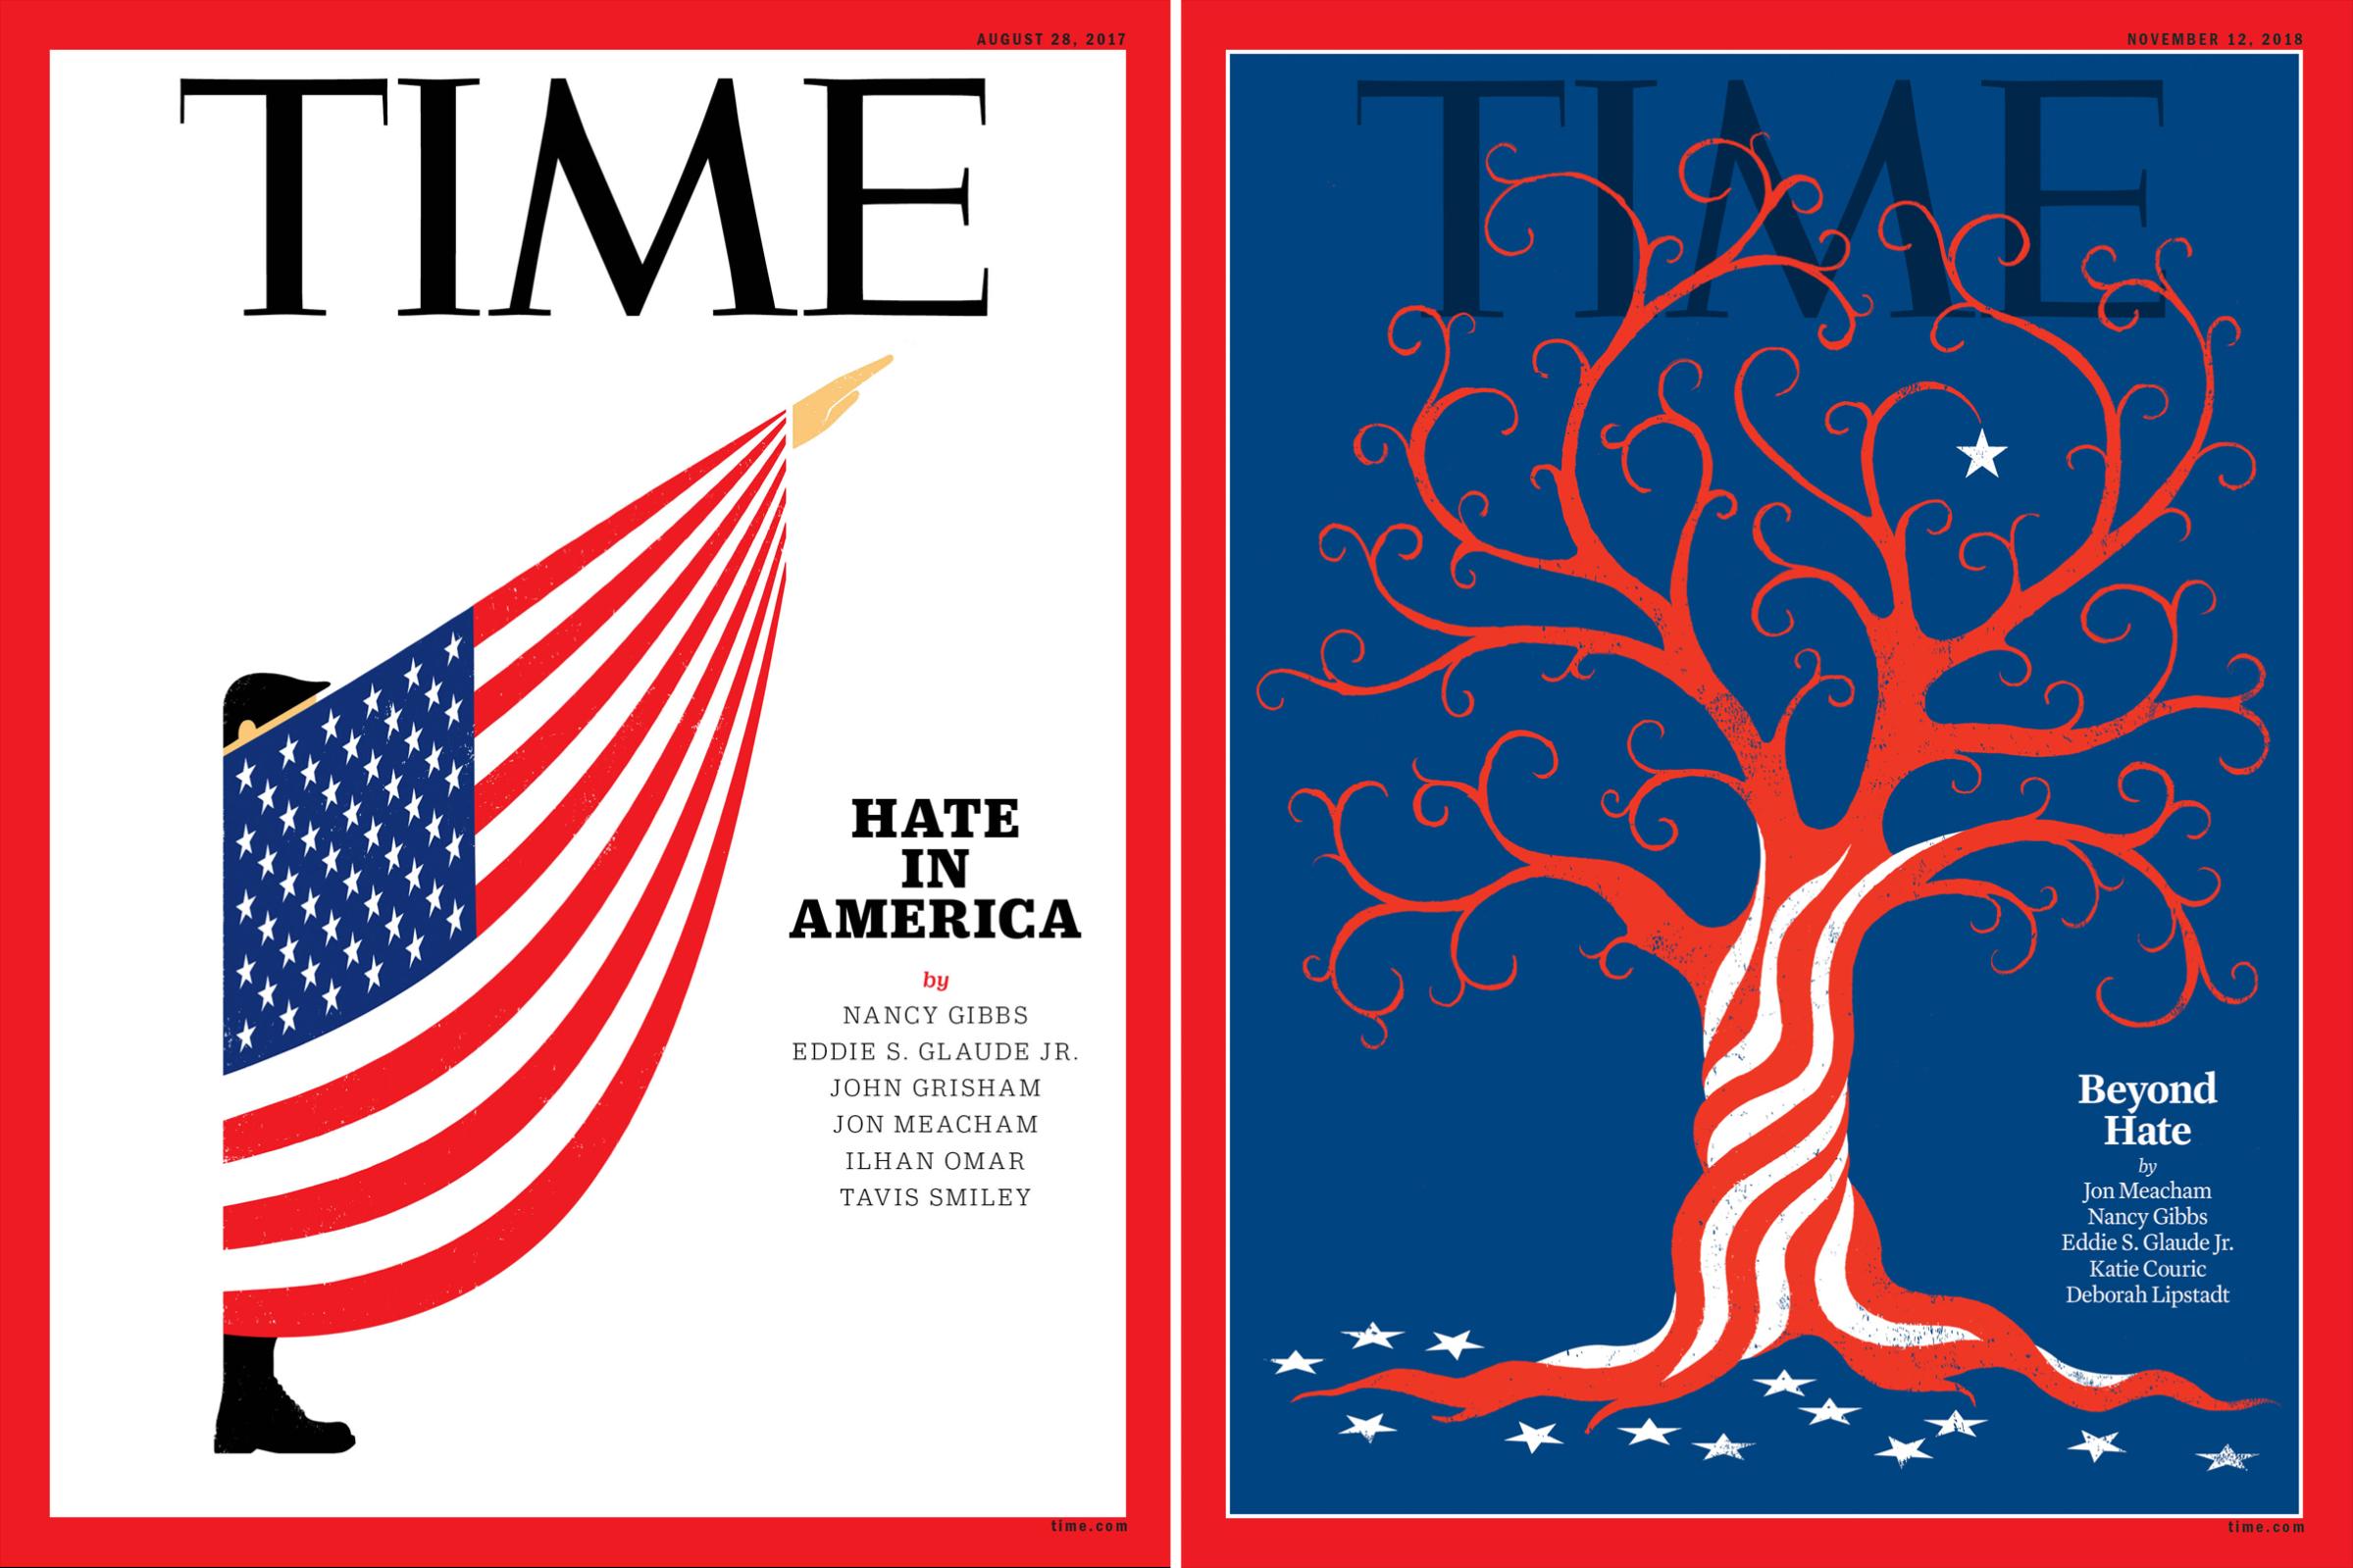 TIME Hate covers